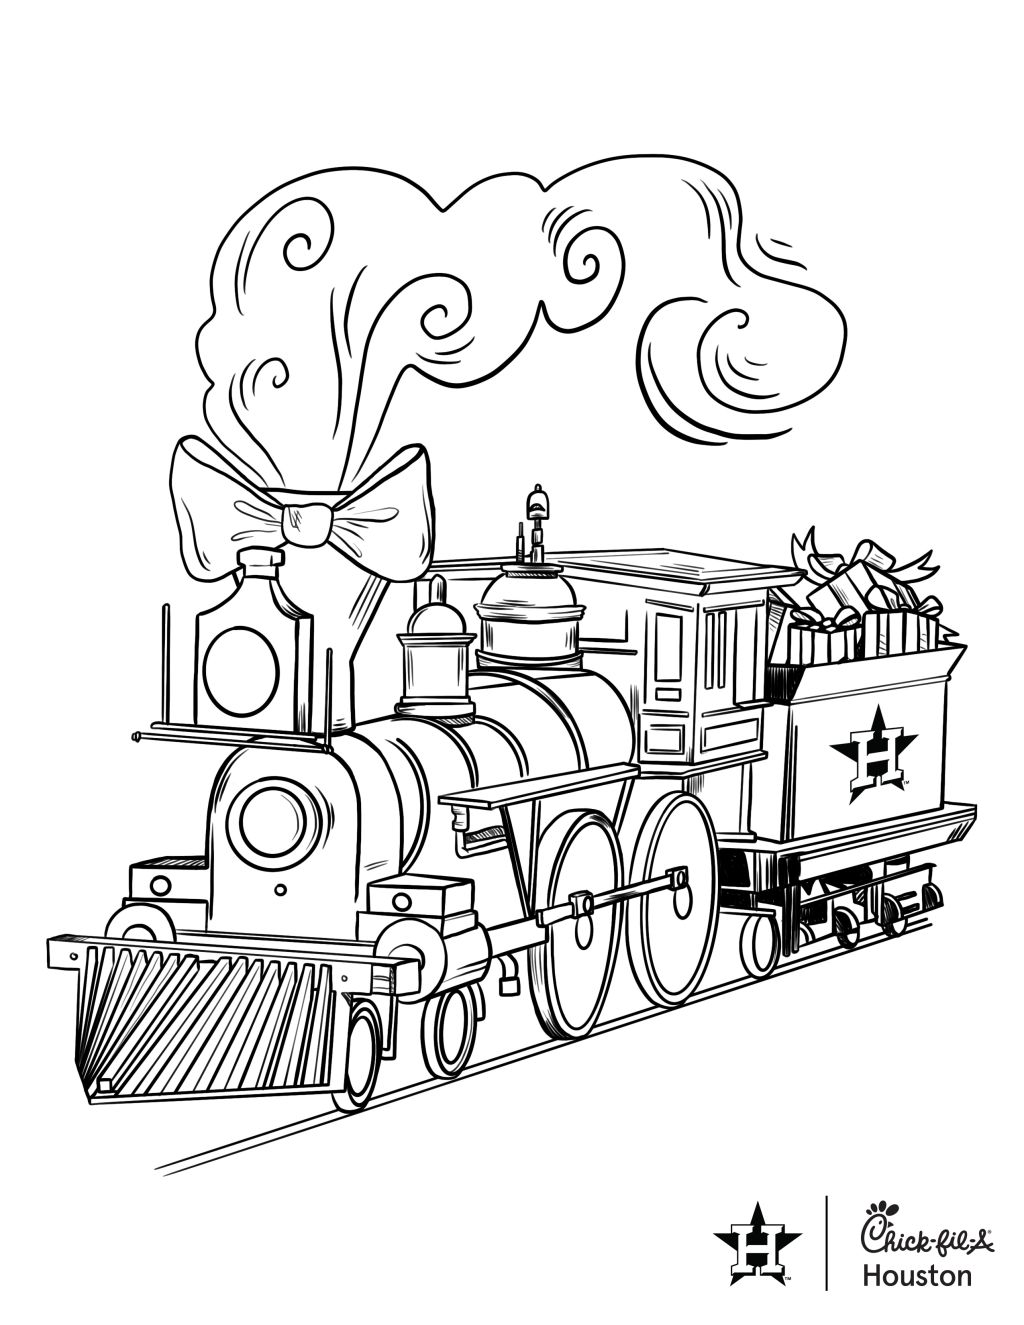 Astros Activities | Holiday Coloring Pages | Houston Astros